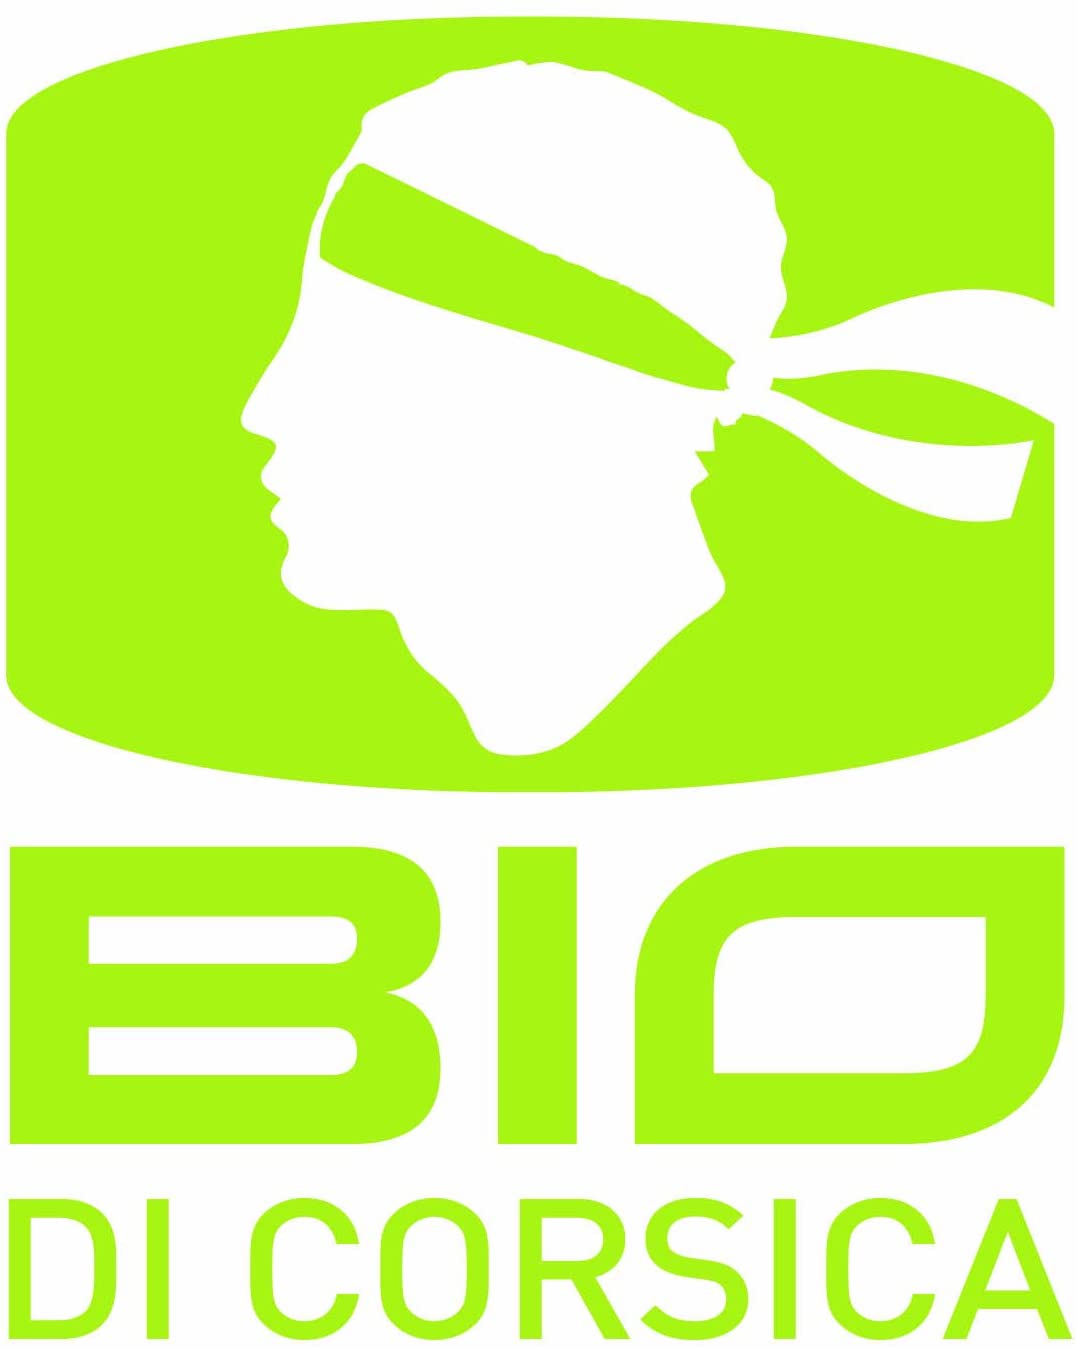 BIO DI CORSICA logo. This product follow the guidelines of the BIO DI CORSICA organization. The product is organic and made only with ingredients from Corsica. BIO di Corsica, the quality pledge of all Corsican producer 